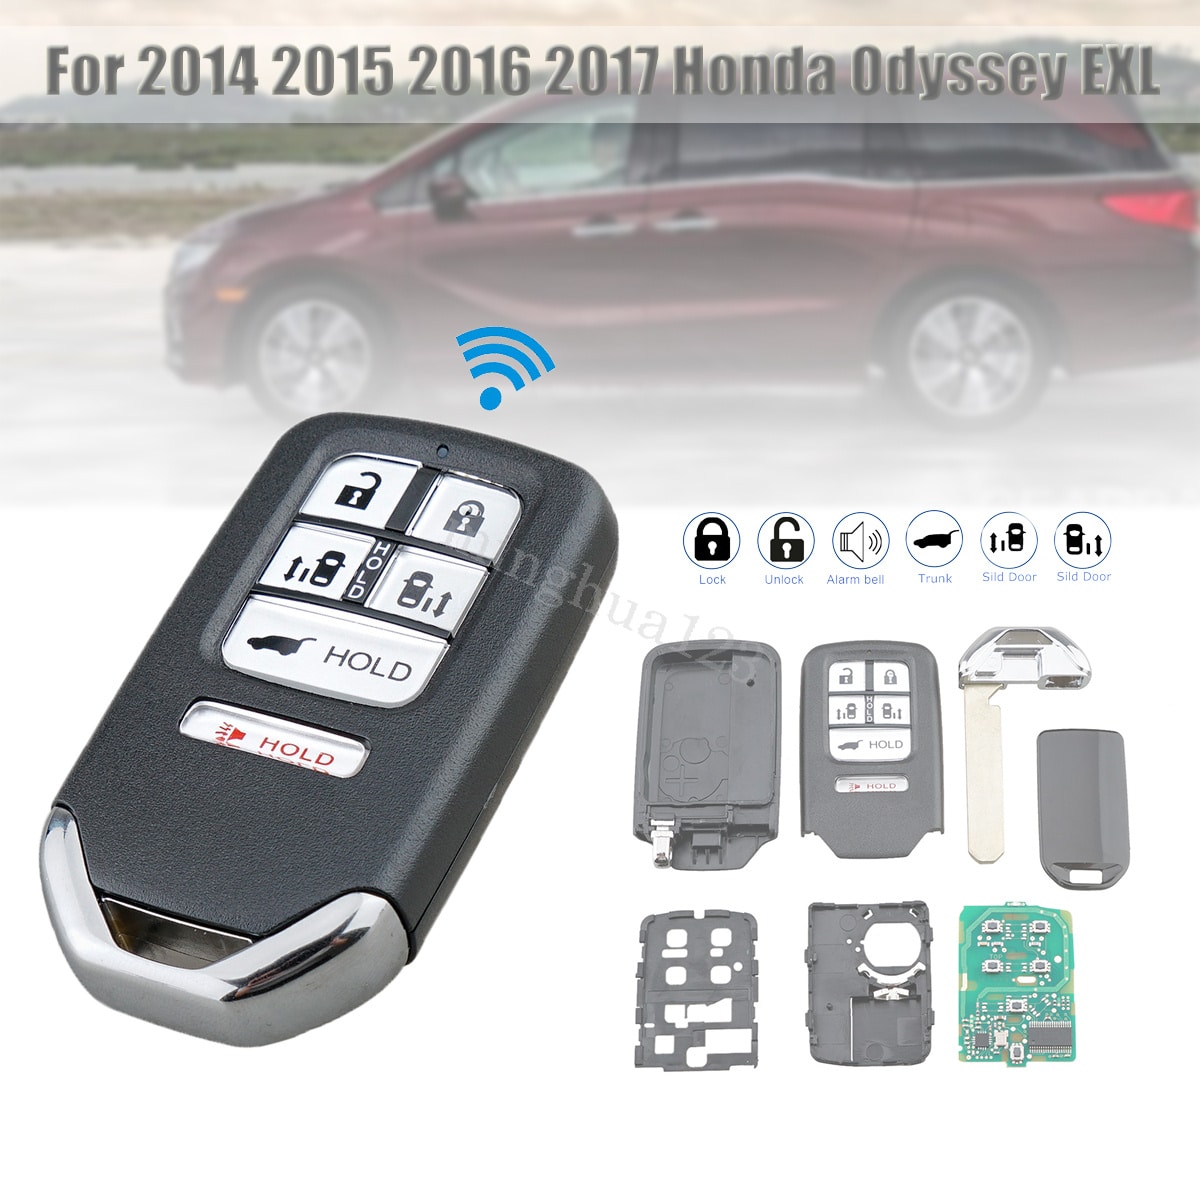 How To Change The Battery In A Honda Crv Key Fob